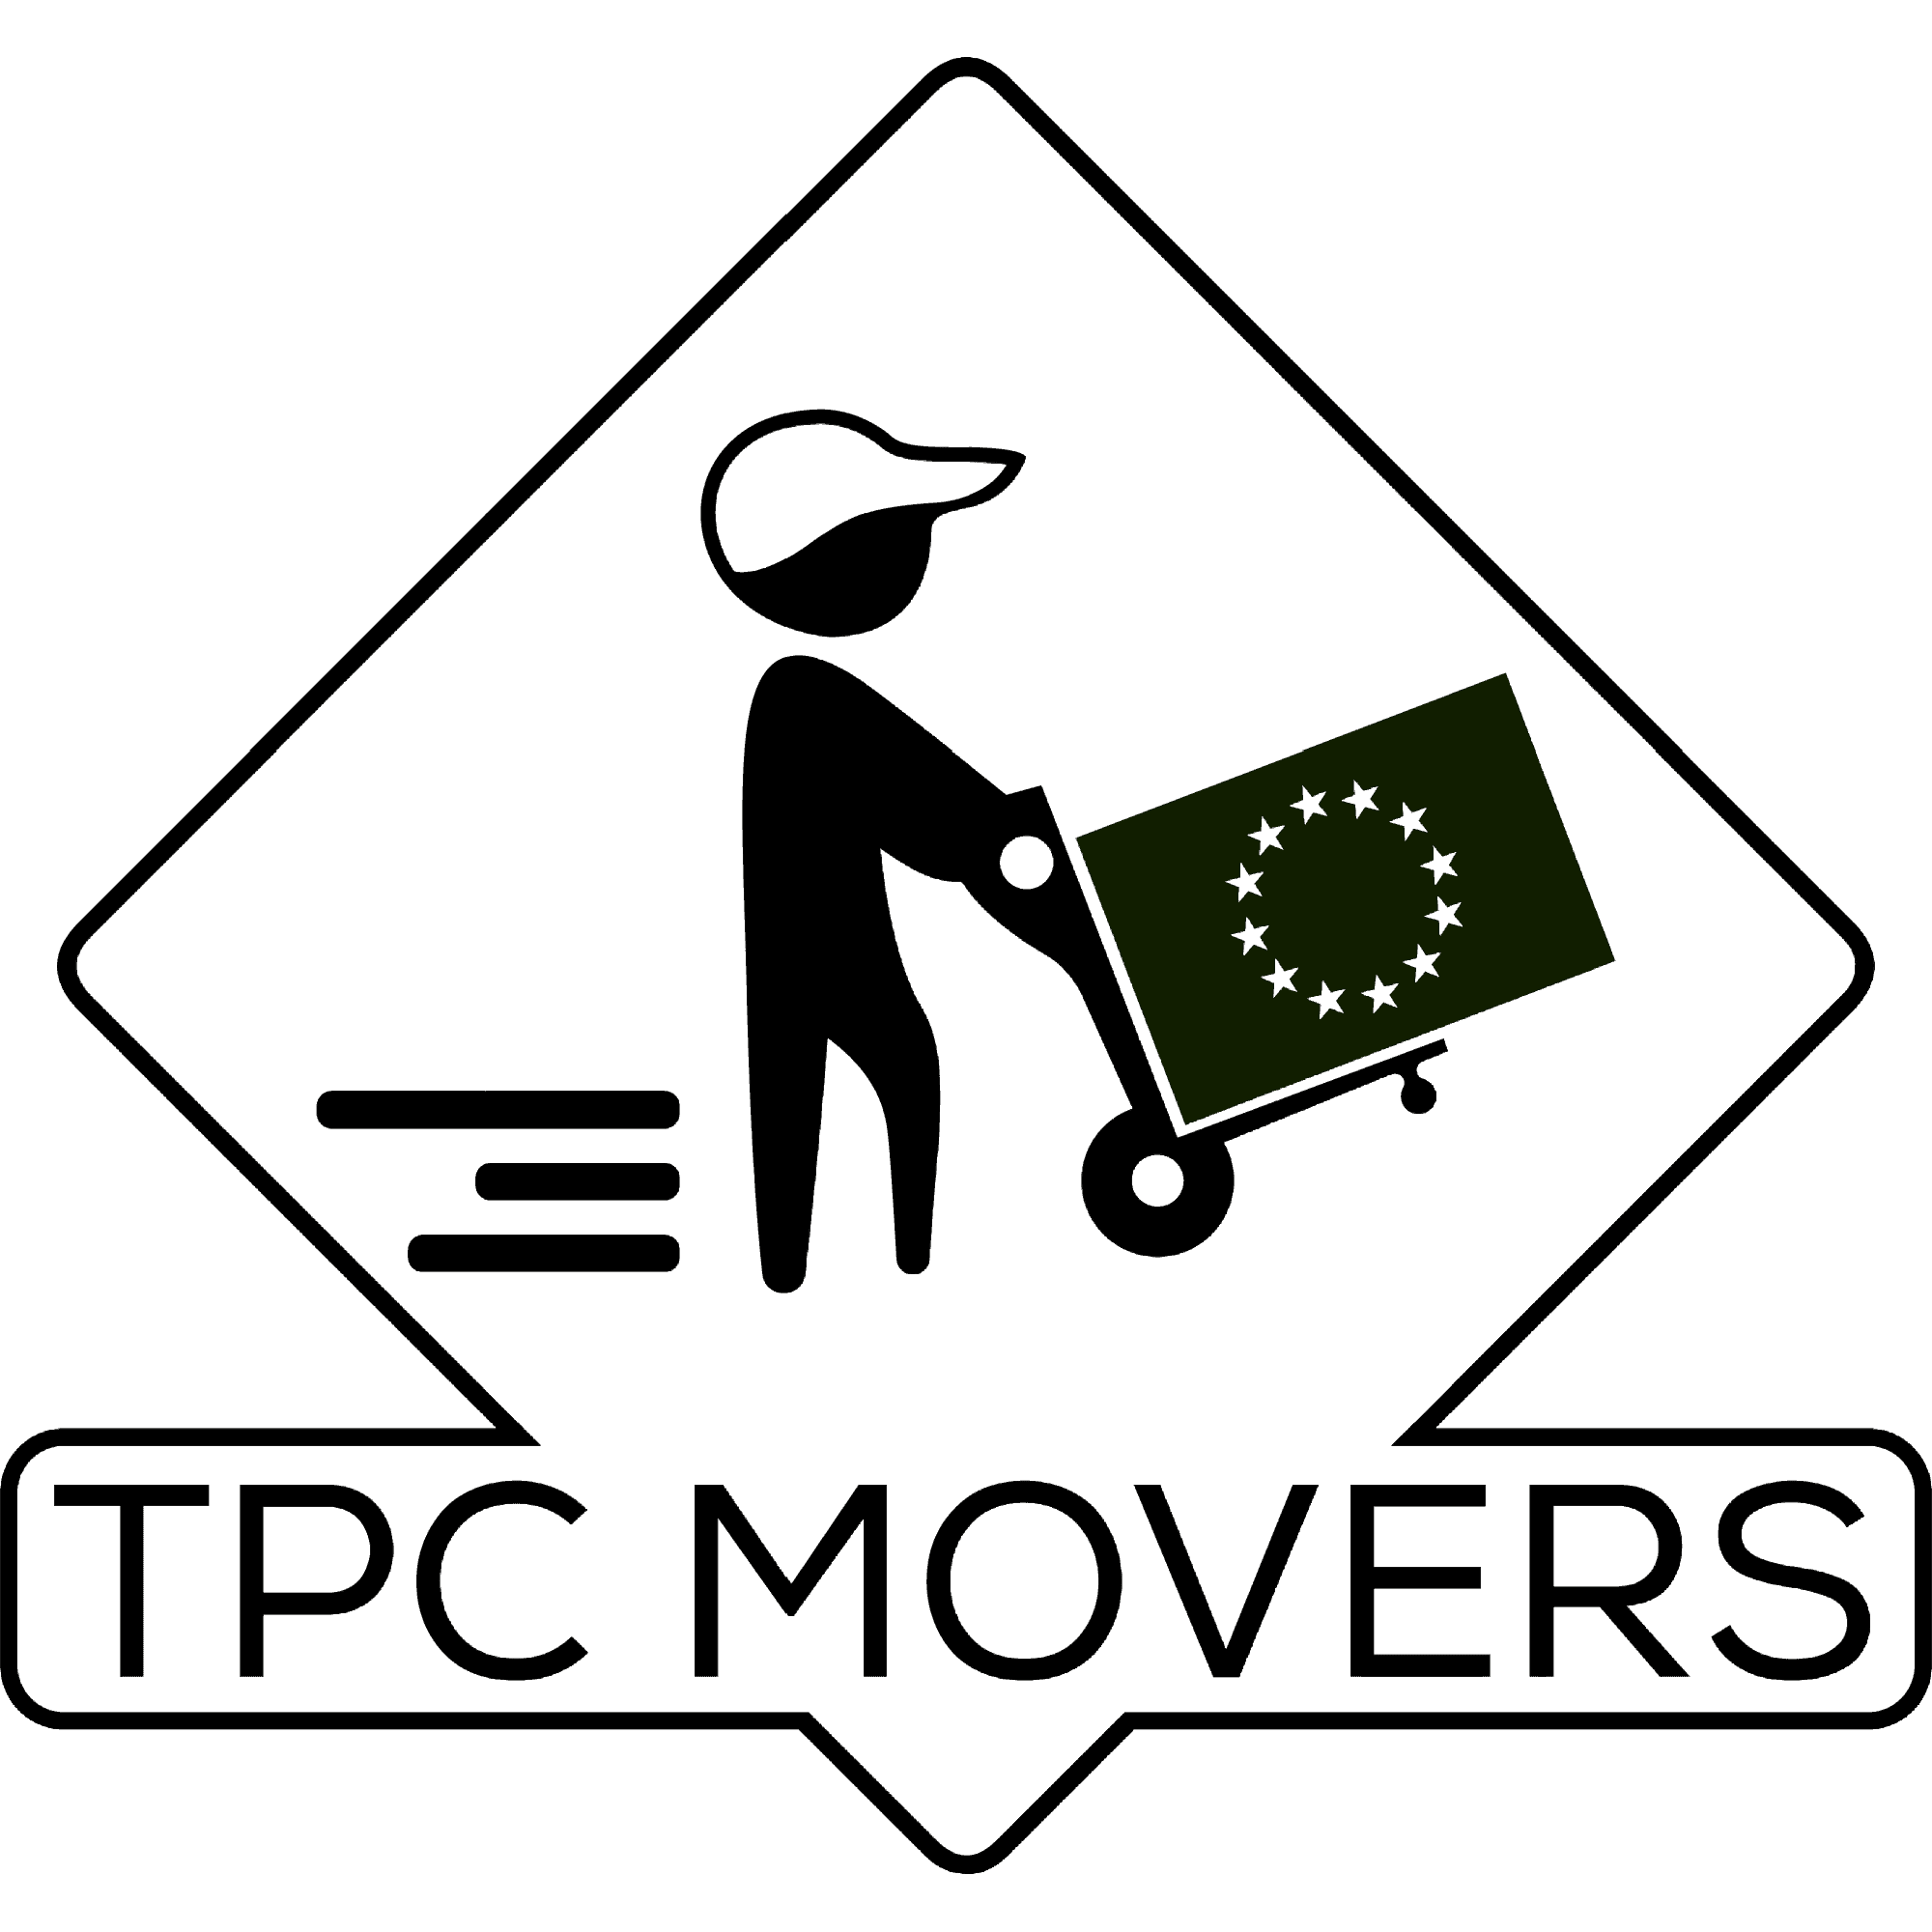 TPC MOVERS - The Only Moving Company you need in Cyprus